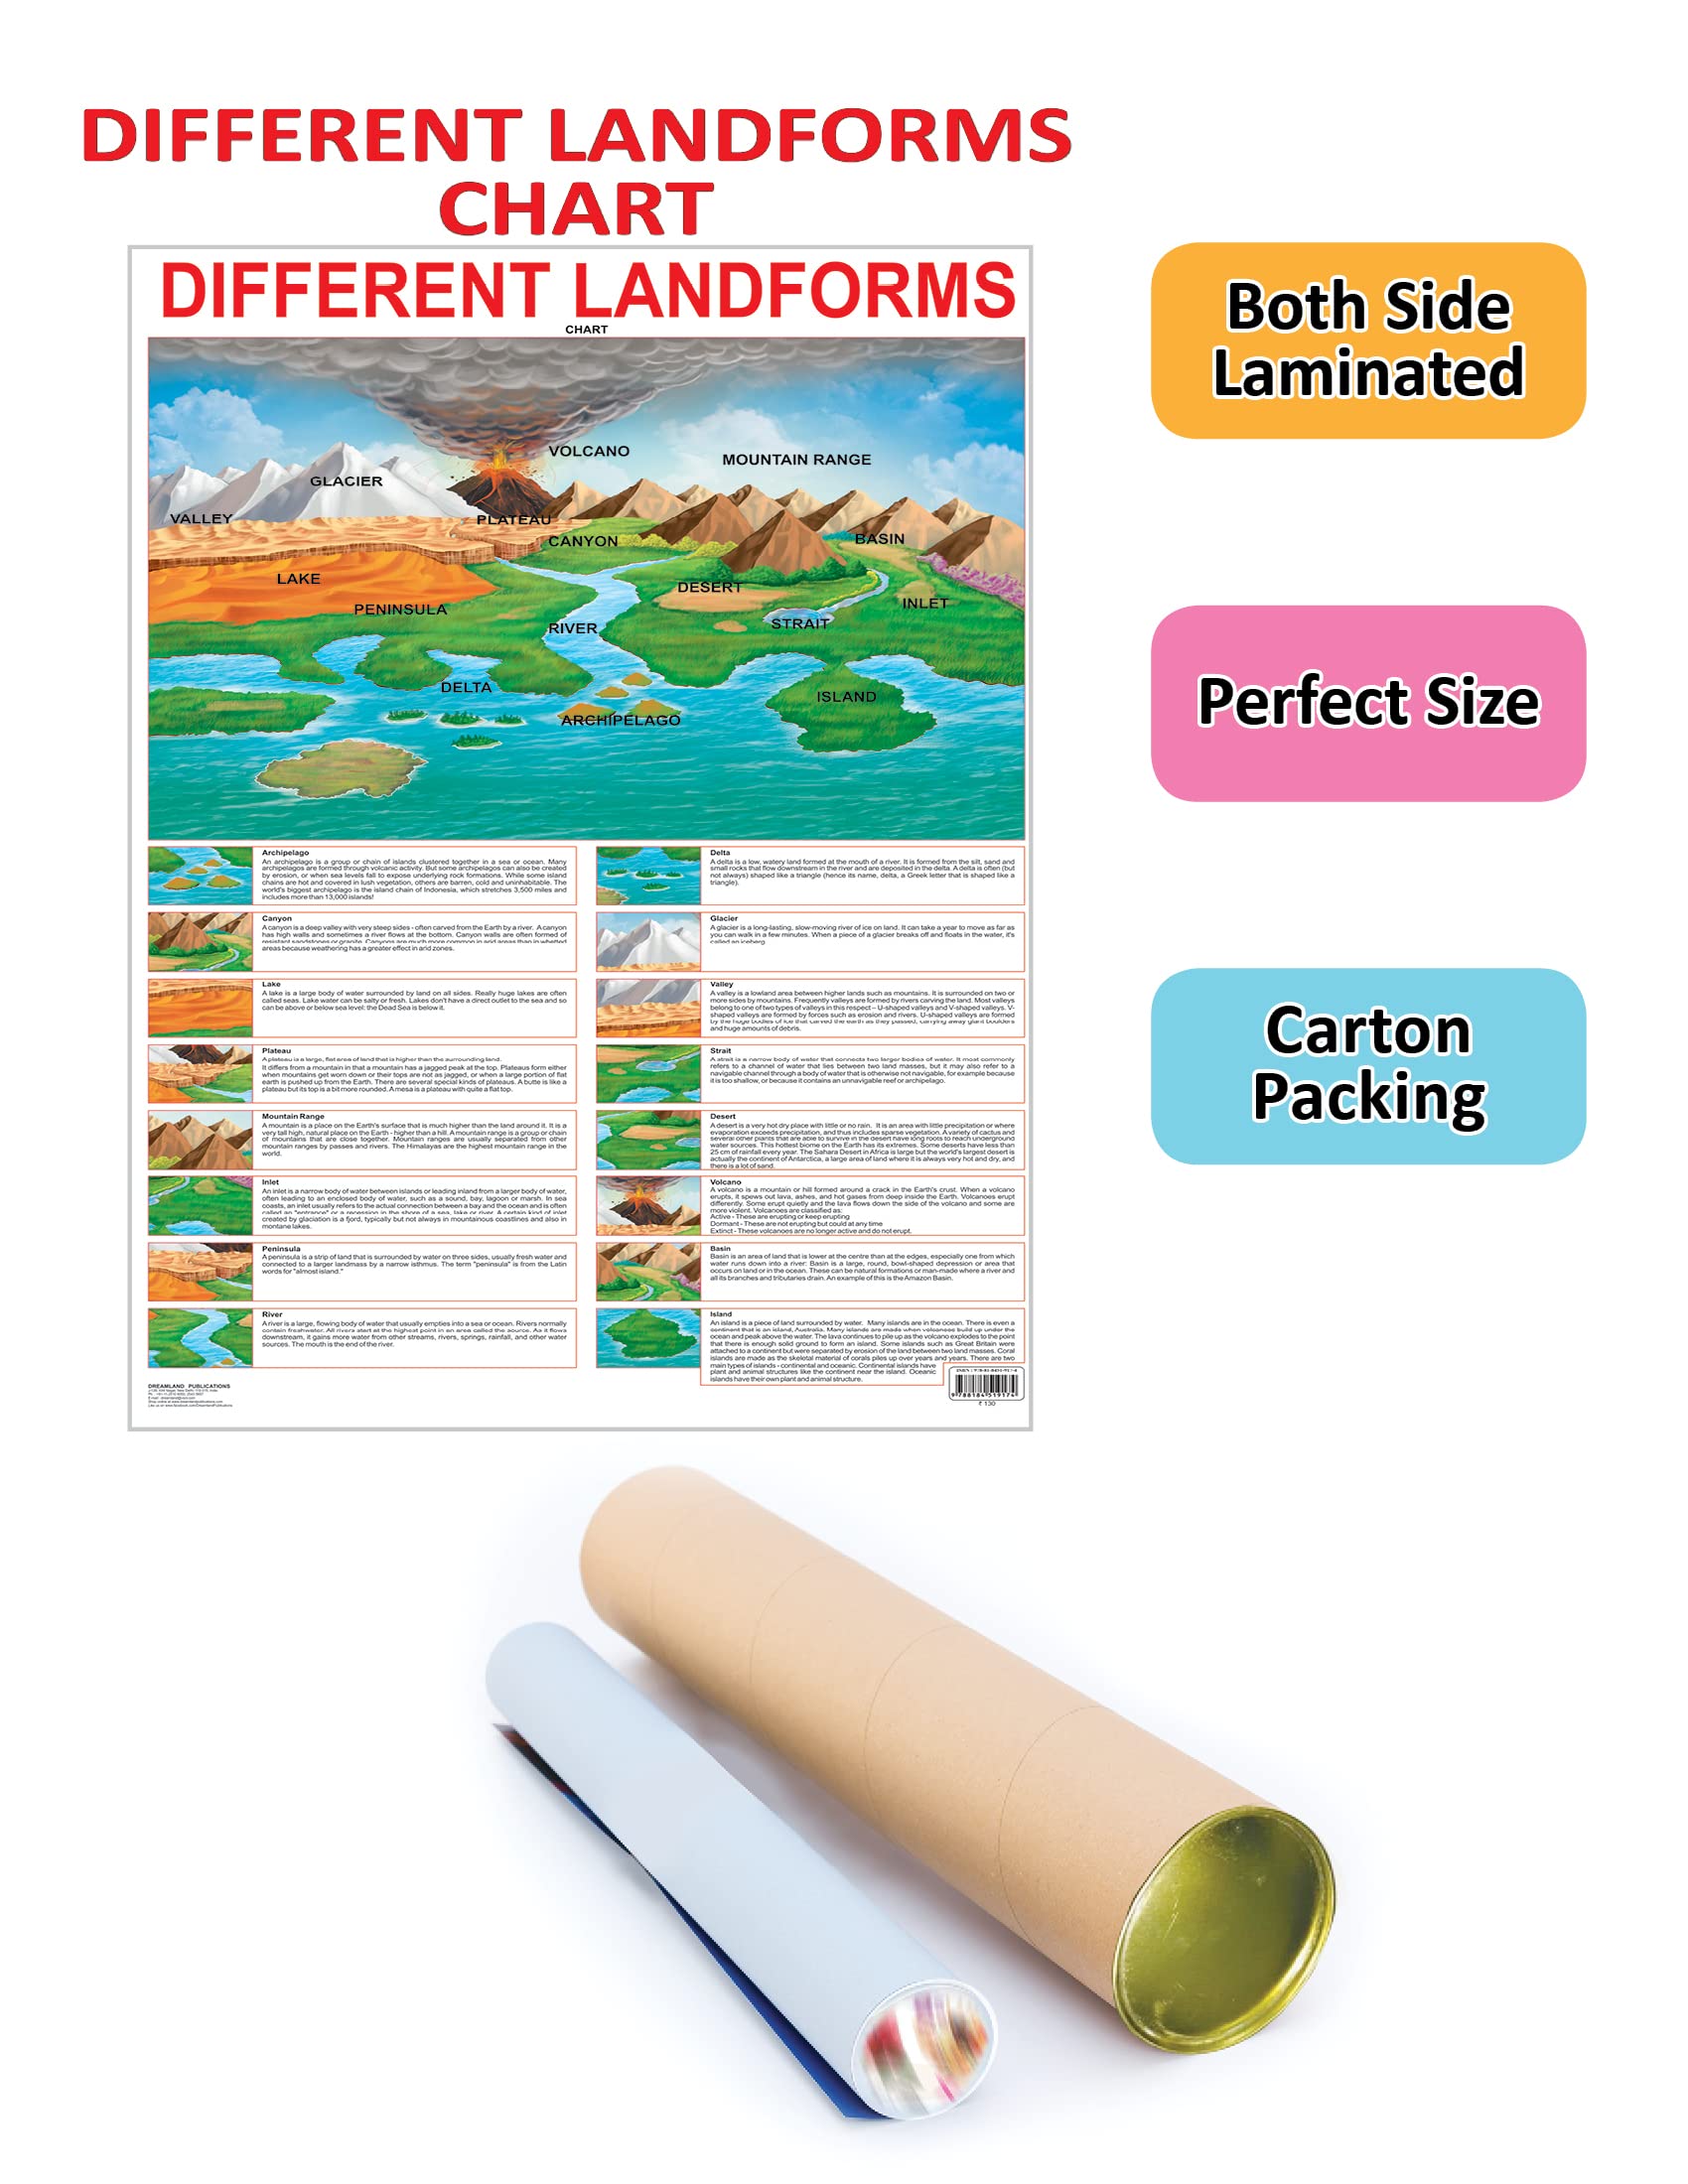 Buy Dreamland Publications Educational Forms Best - Chart Price Kids Land Online Different at for | Distacart